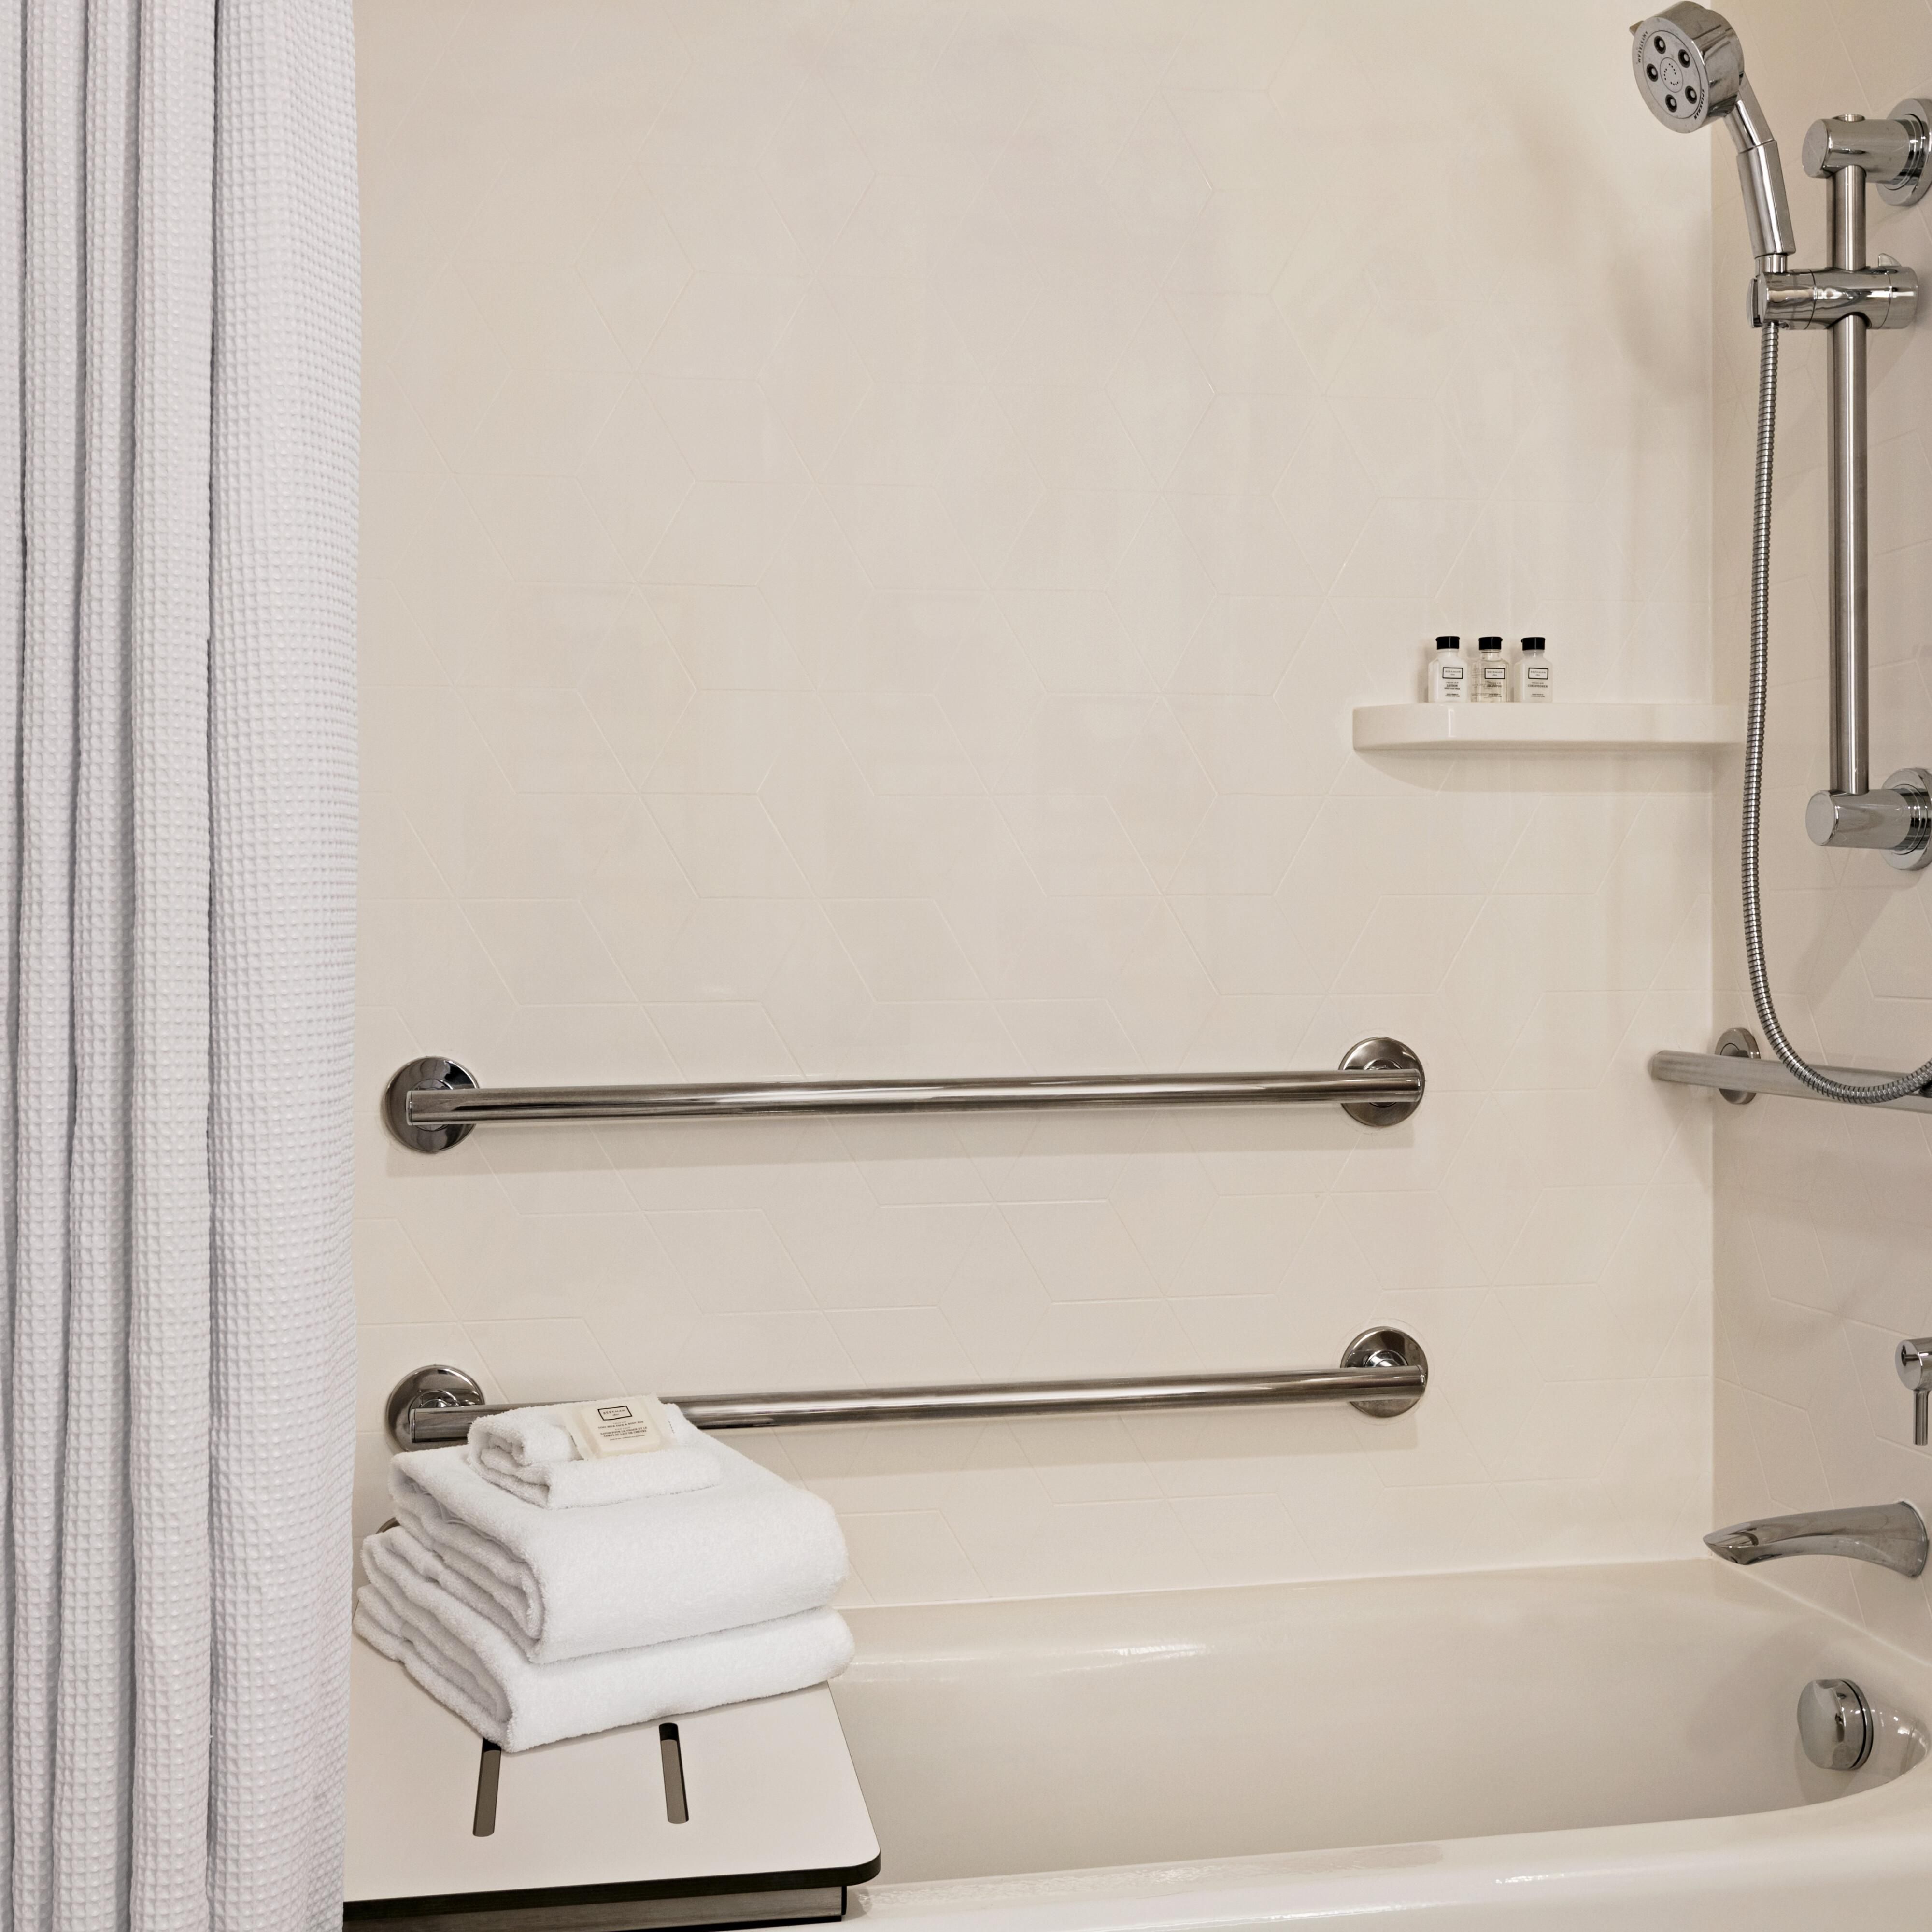 Our hotel offers mobility accessible bathrooms with tub.